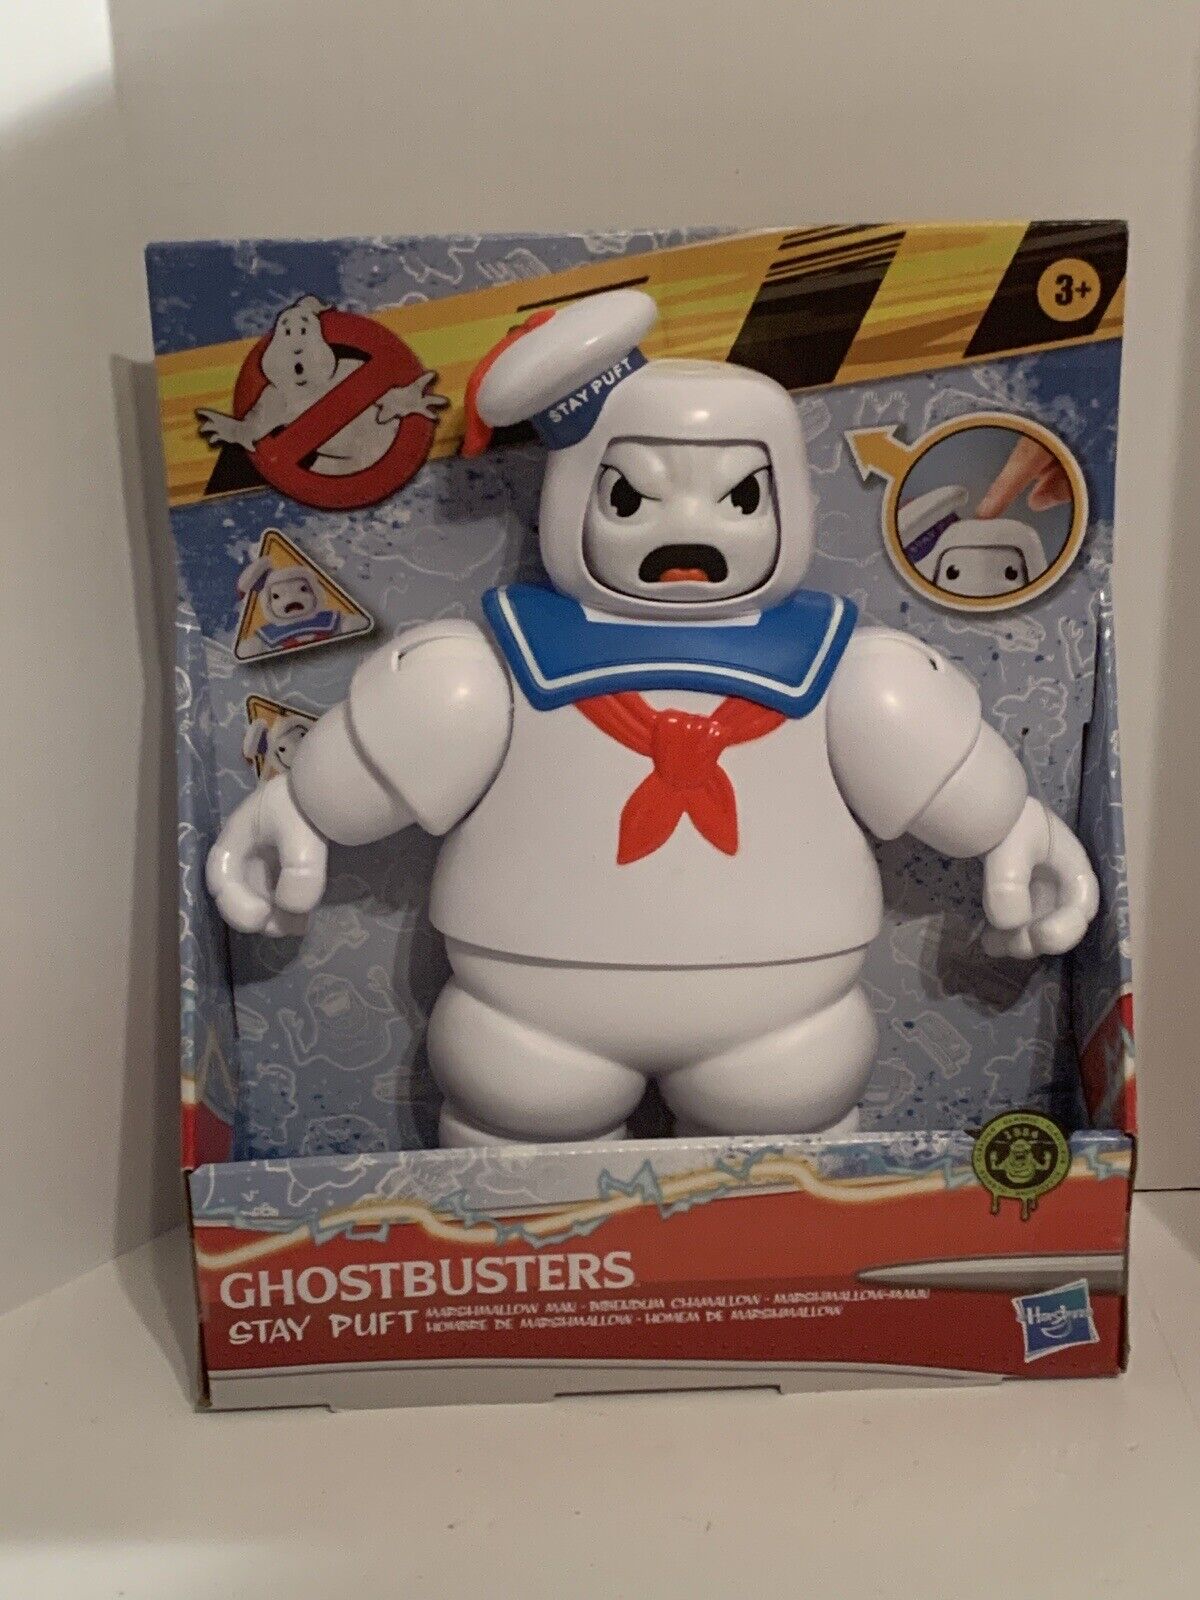 Hasbro Ghostbusters Stay Puft Marshmallow Man Figure Changes Face Expression